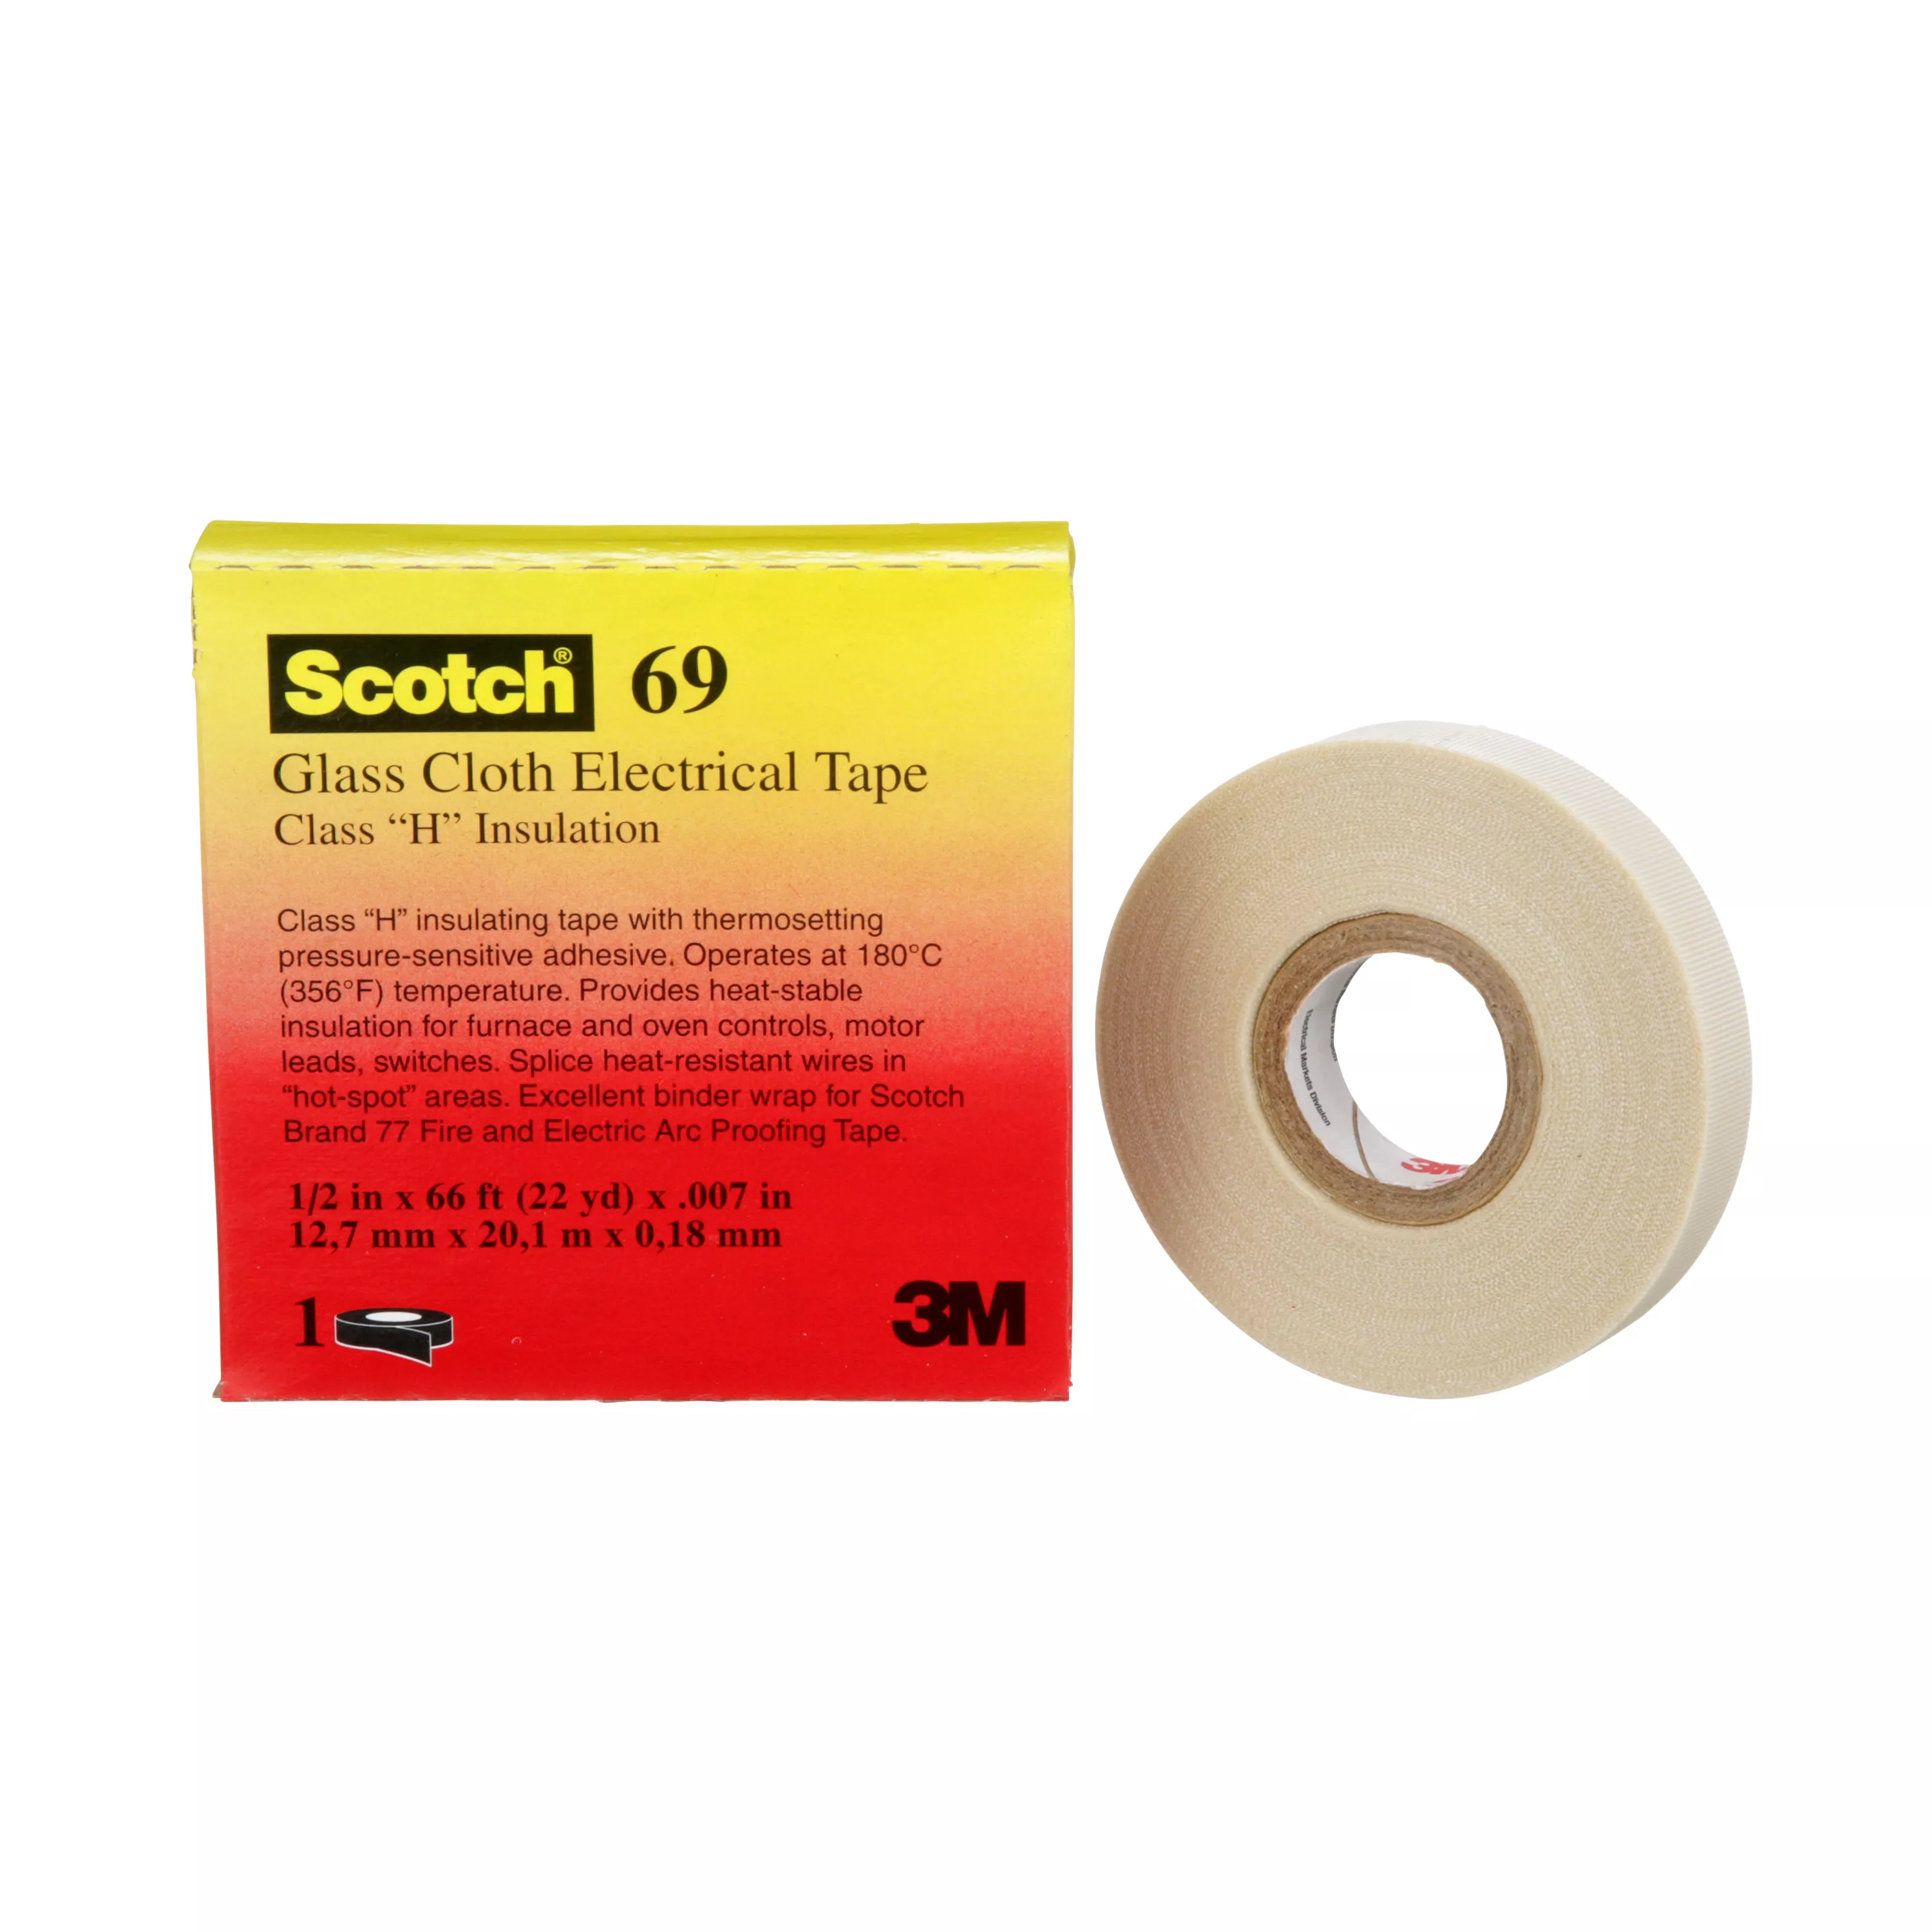 3M™ Glass Cloth Electrical Tape 69, 1/2 in x 66 ft, White, 50 Rolls/Case